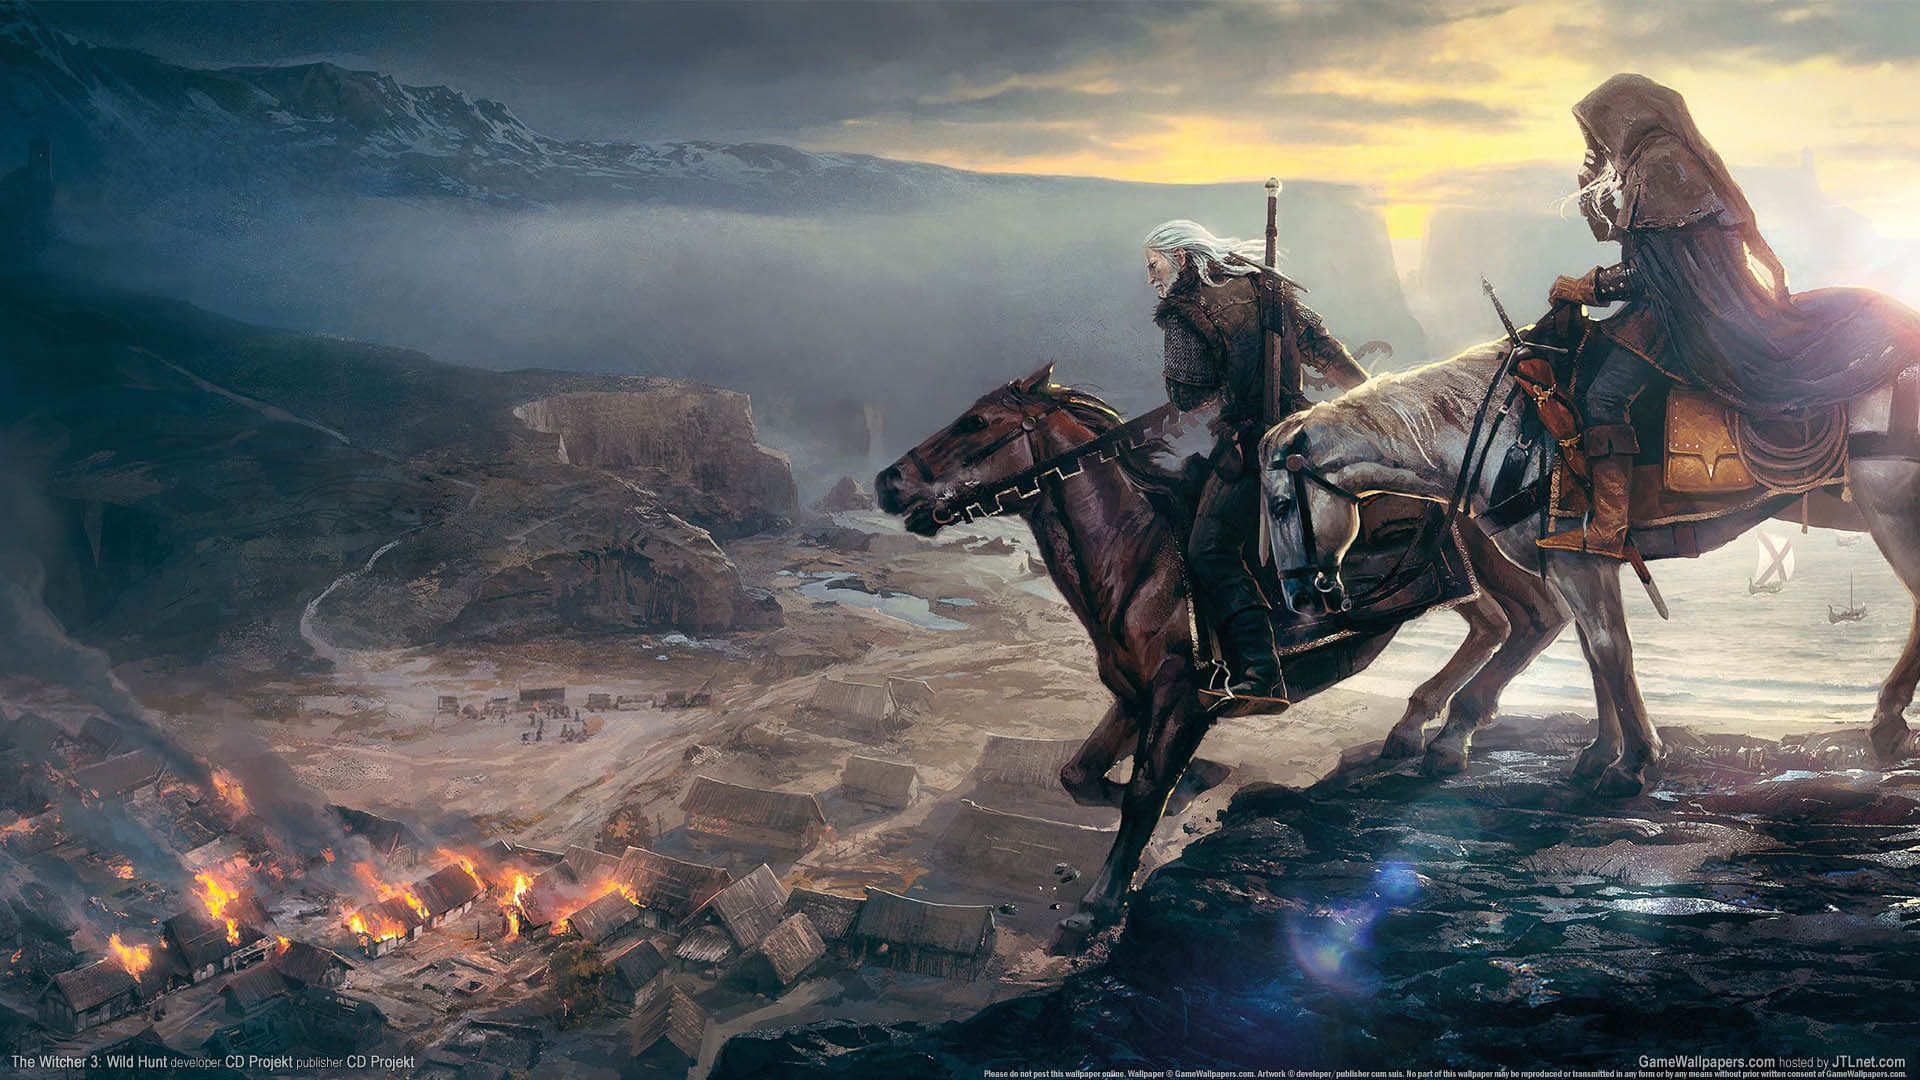 witcher 3 animated wallpaper,horse,mythology,conquistador,strategy video game,cg artwork